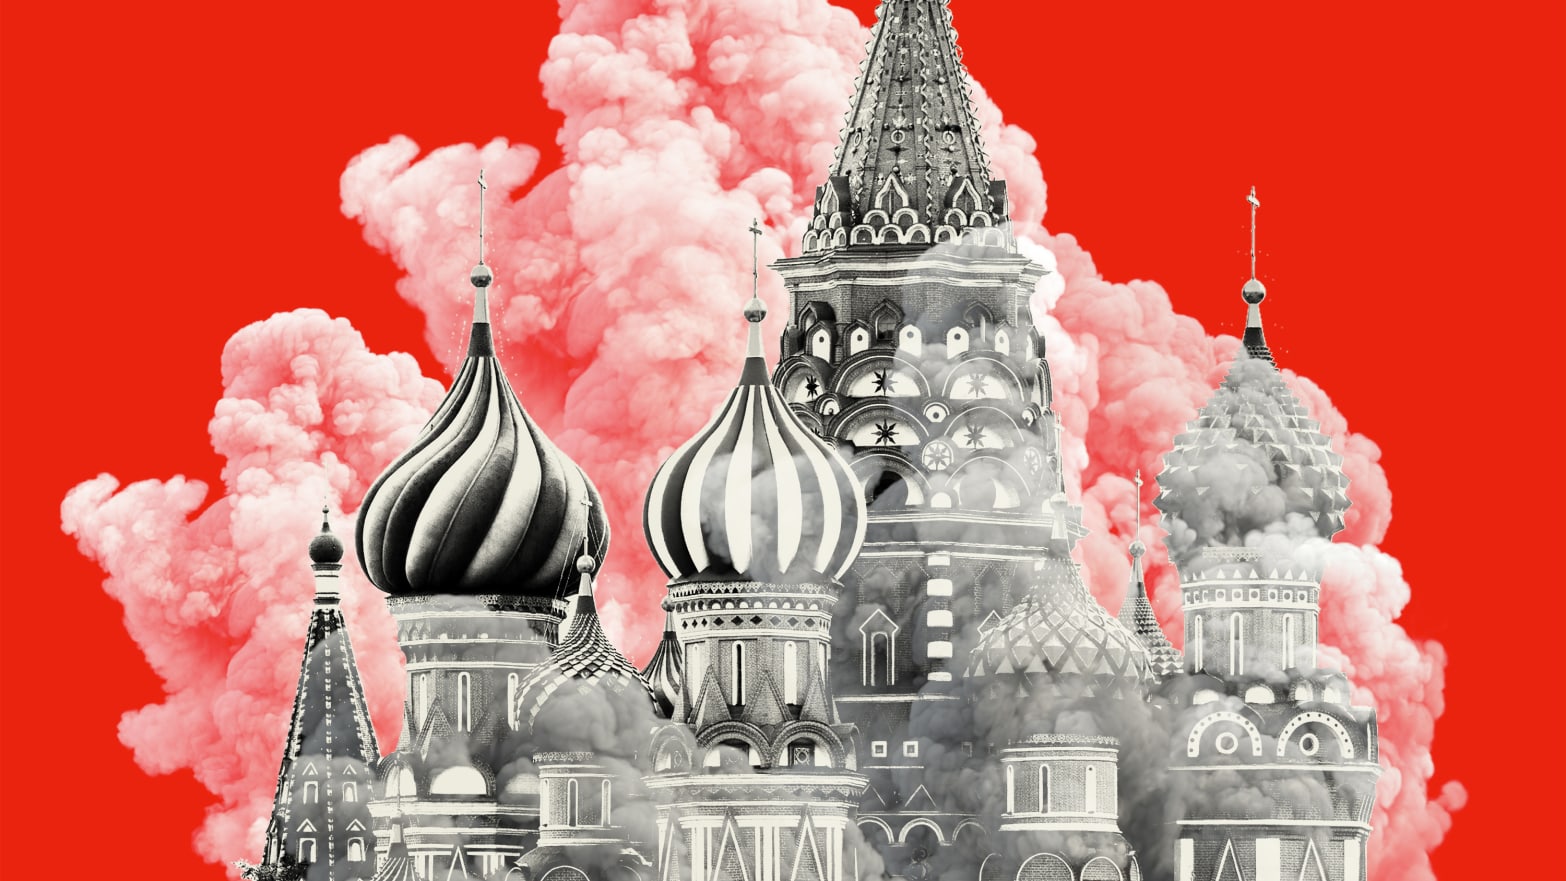 Photo illustration of St Basil’s Cathedral in Moscow with smoke layered in front and behind.